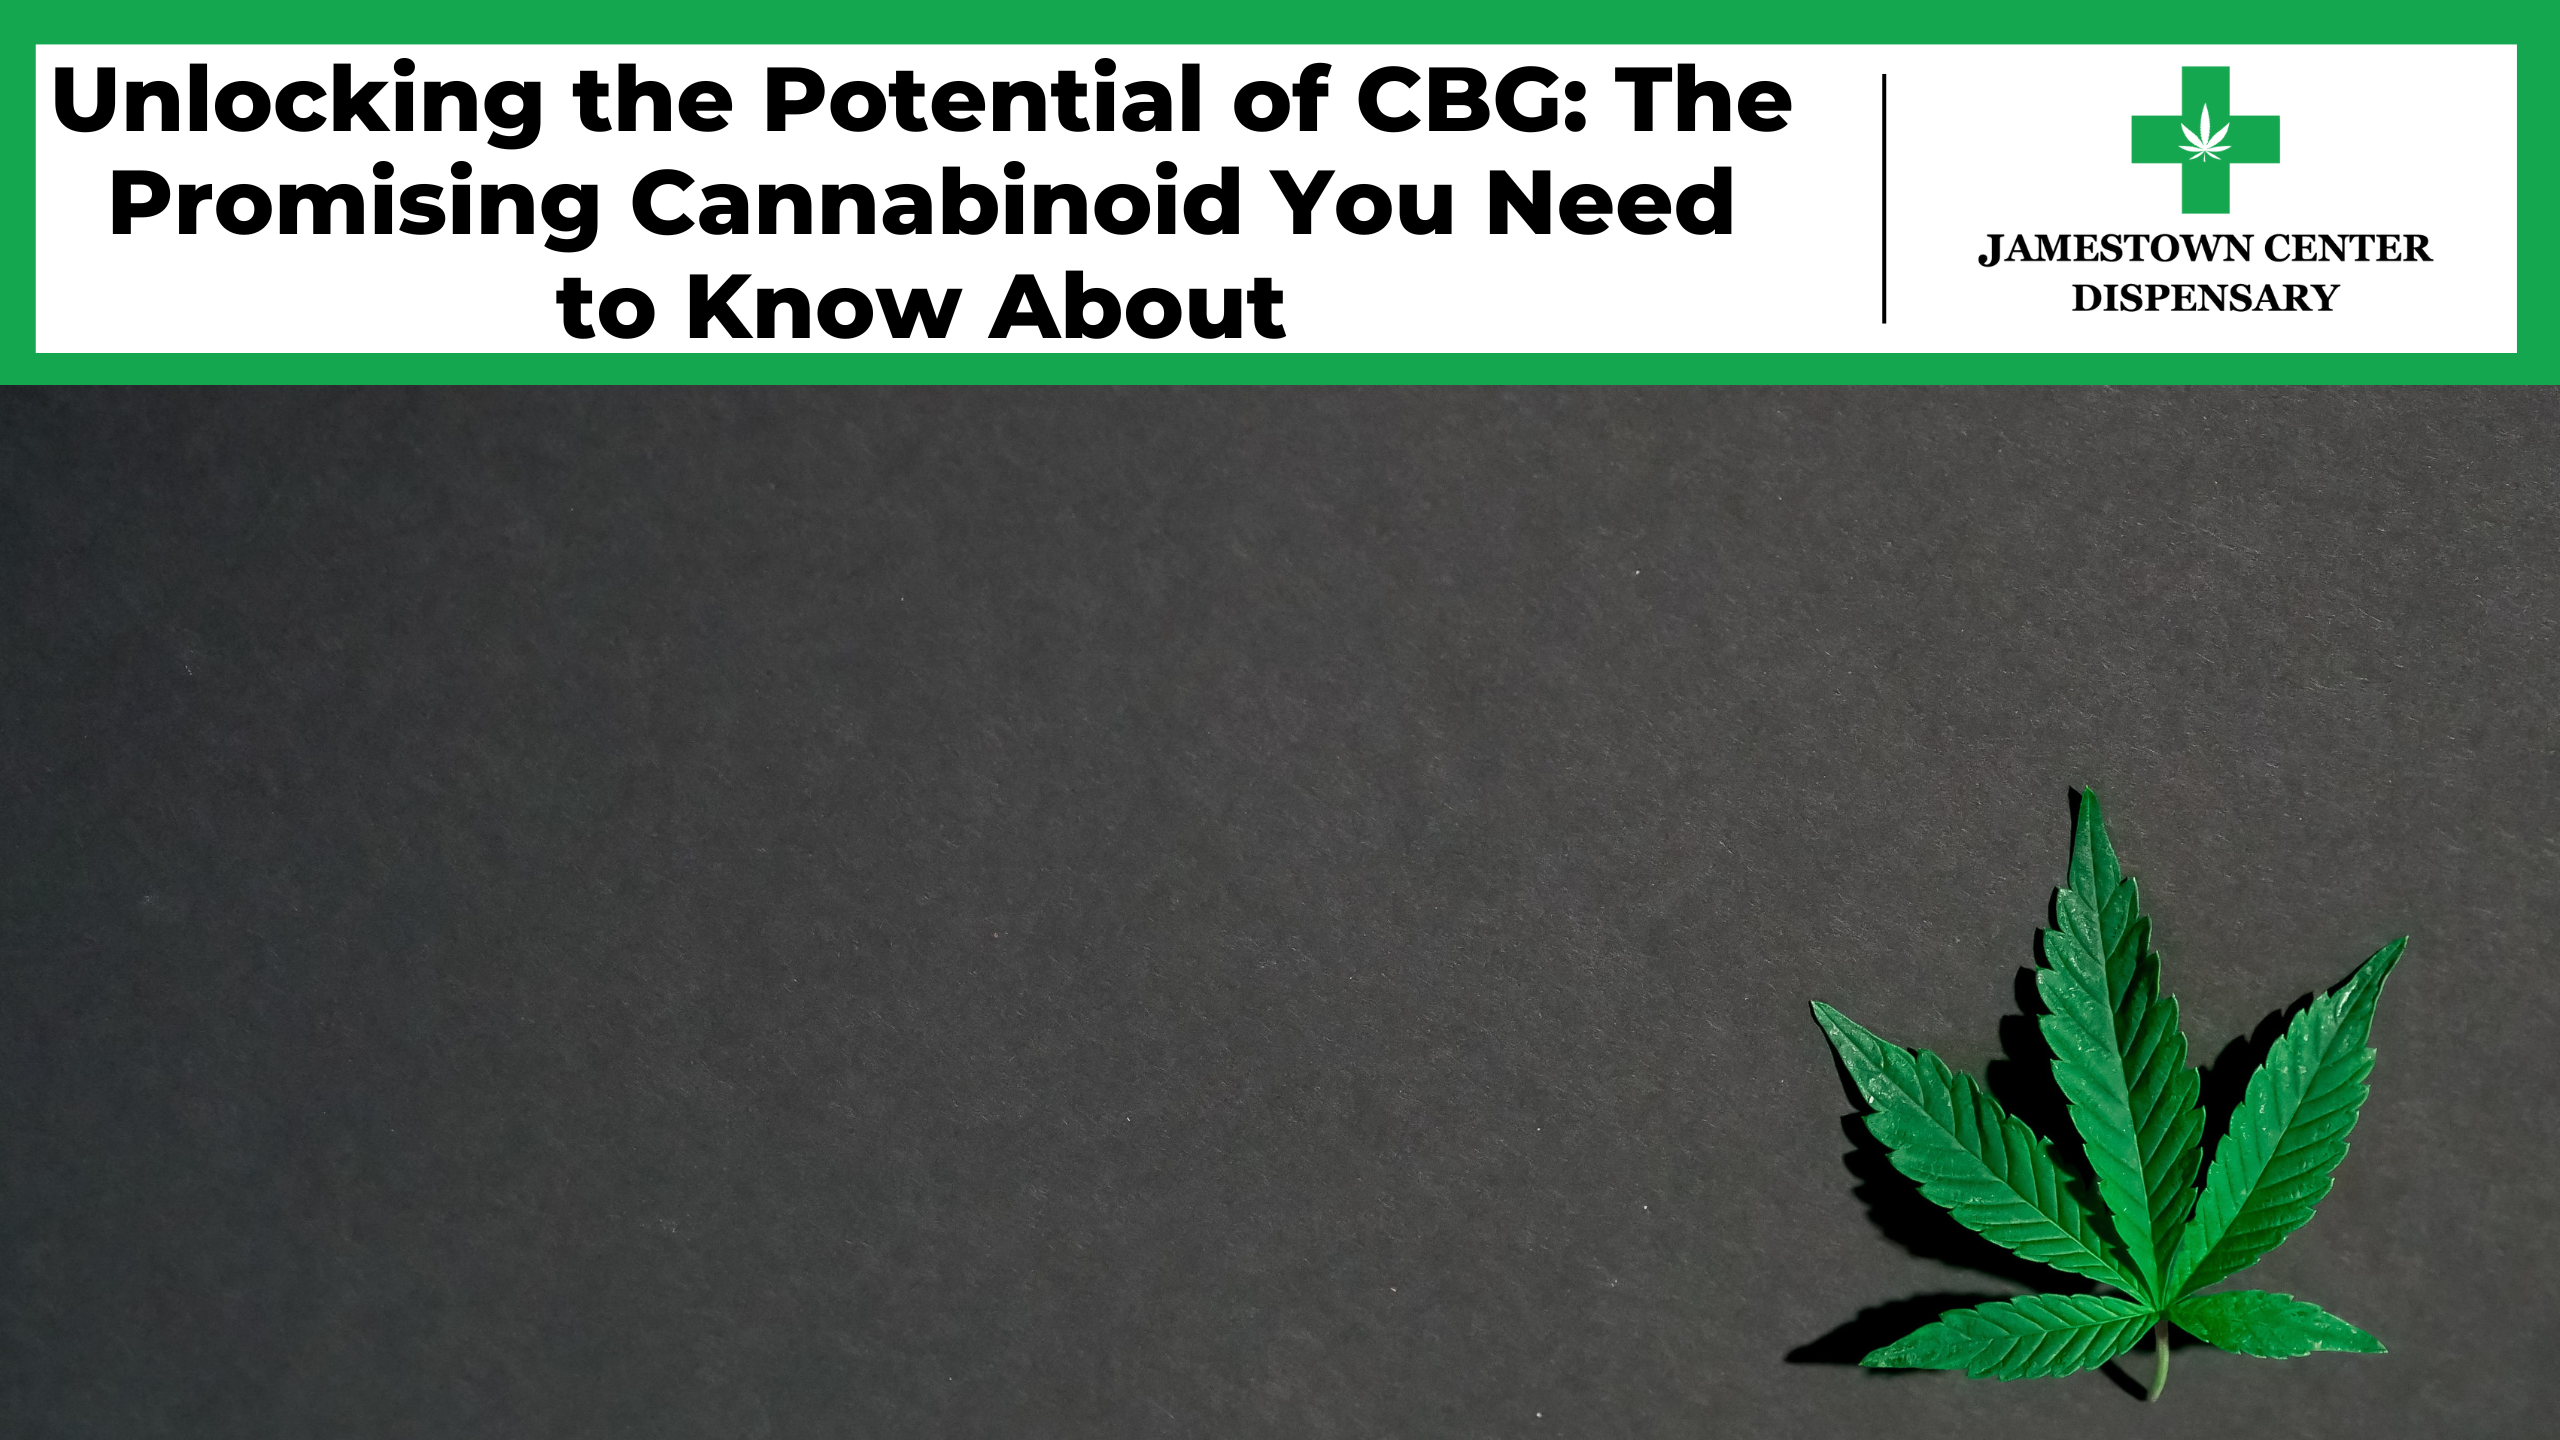 Unlocking the Potential of CBG: The Promising Cannabinoid You Need to Know About